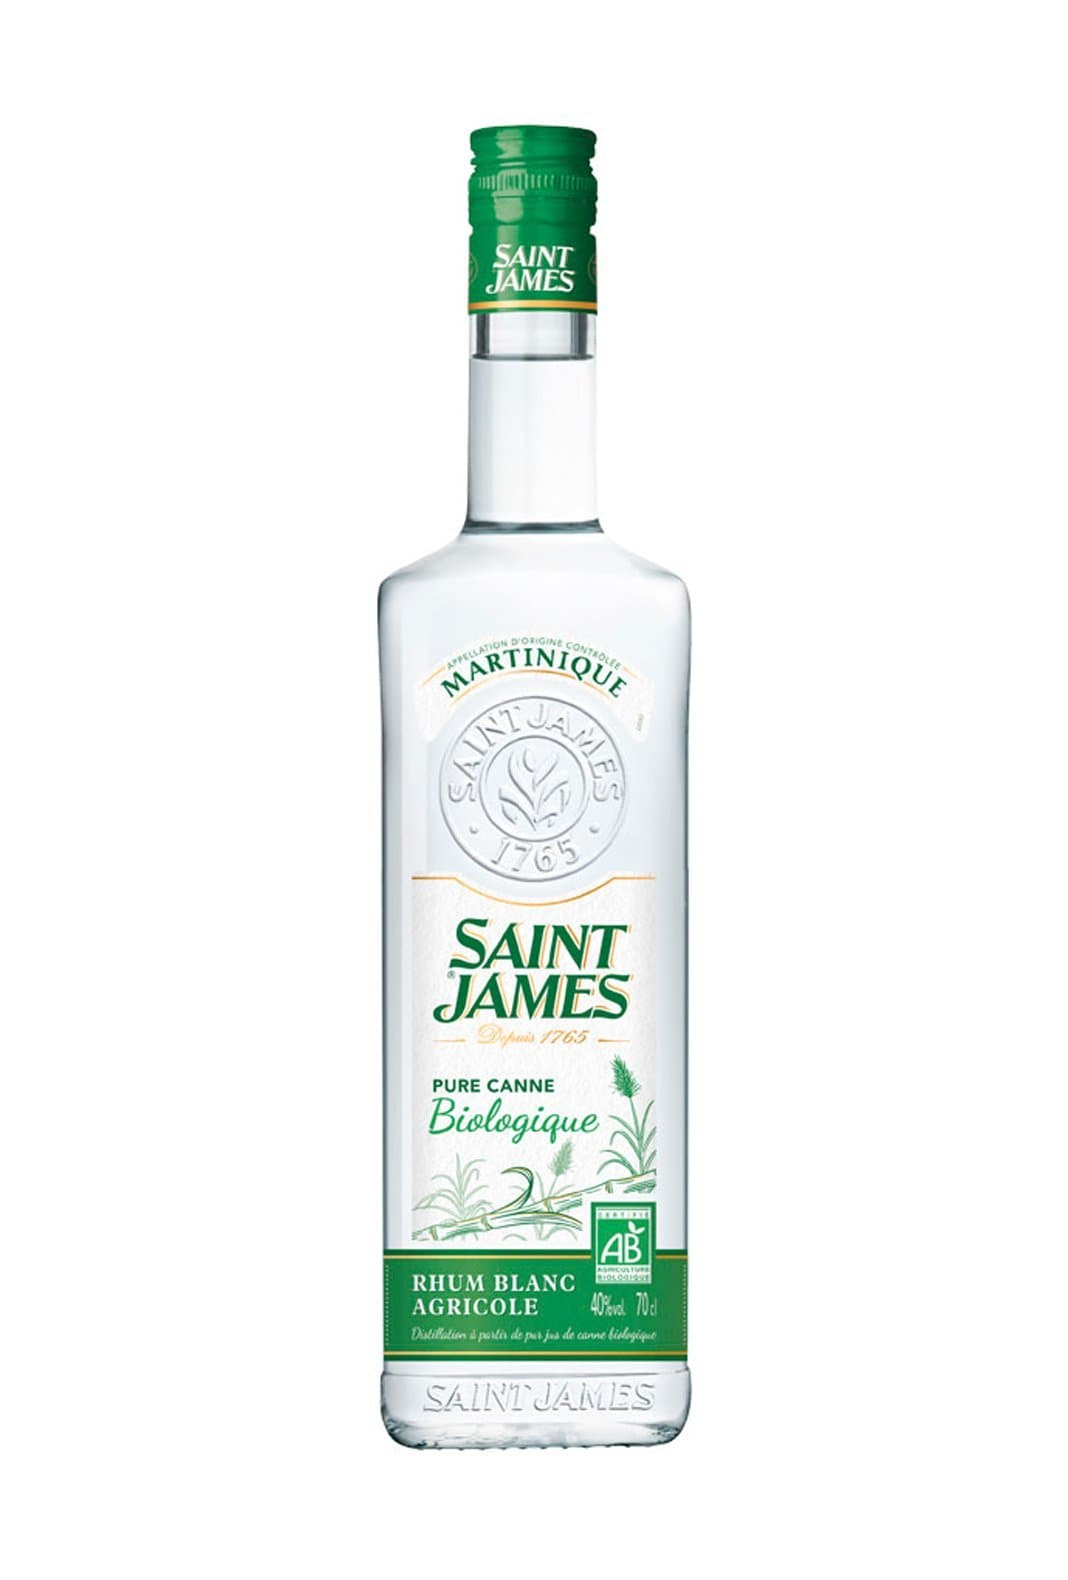 St James Organic Imperial Blanc Rum (White) 40% 700ml | Rum | Shop online at Spirits of France